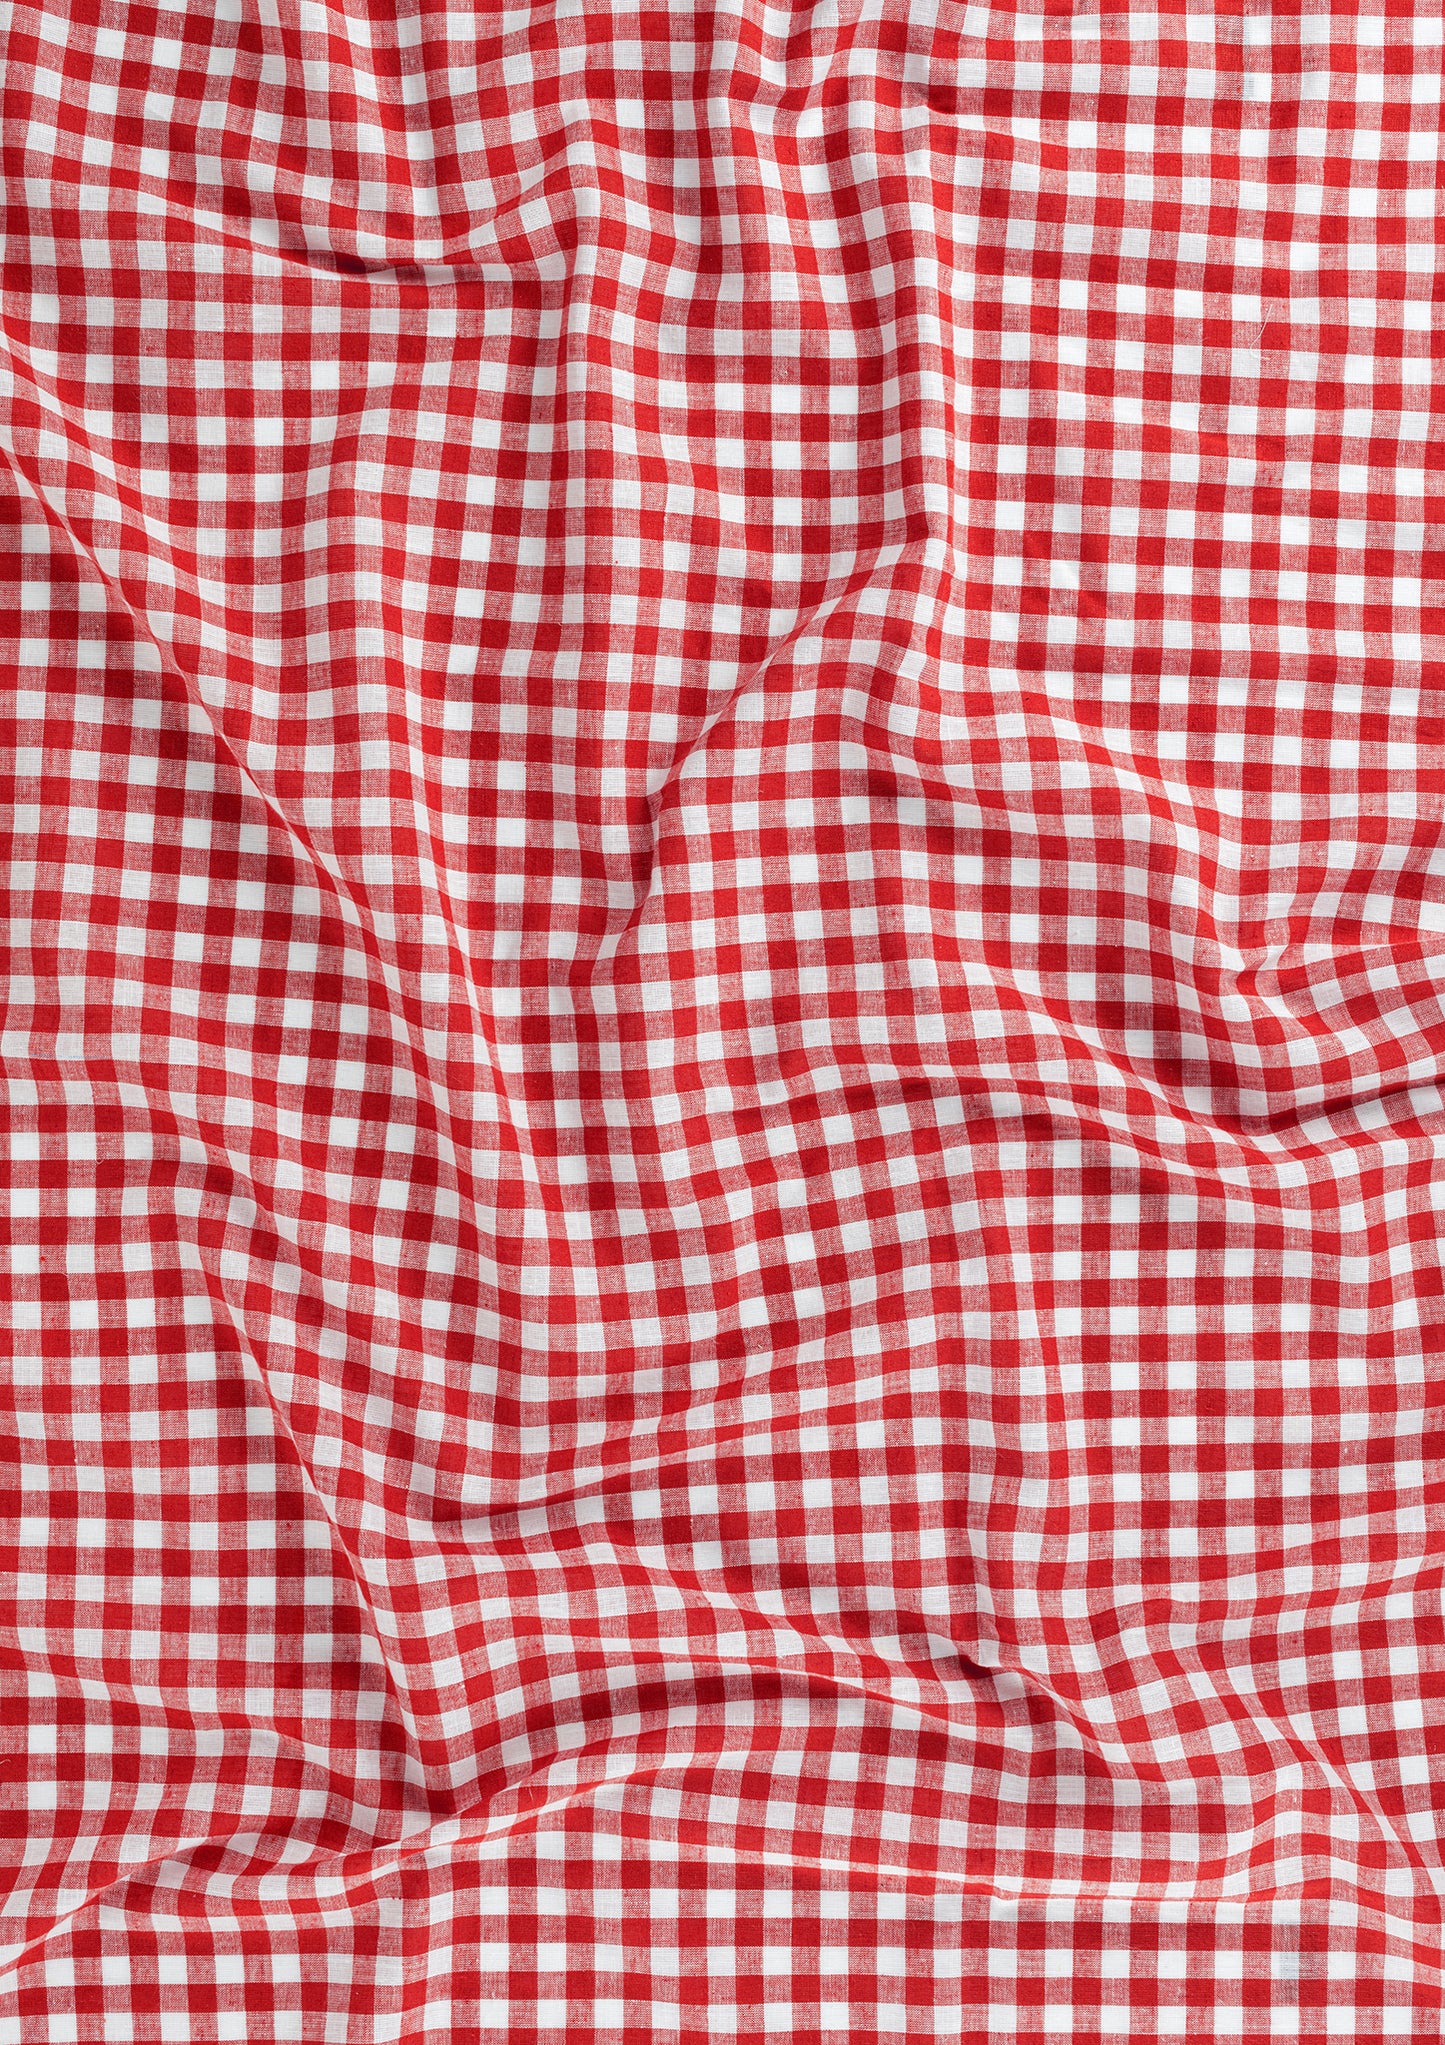 Red and White A1 Photography Backdrop - Gingham Fabric with Folds